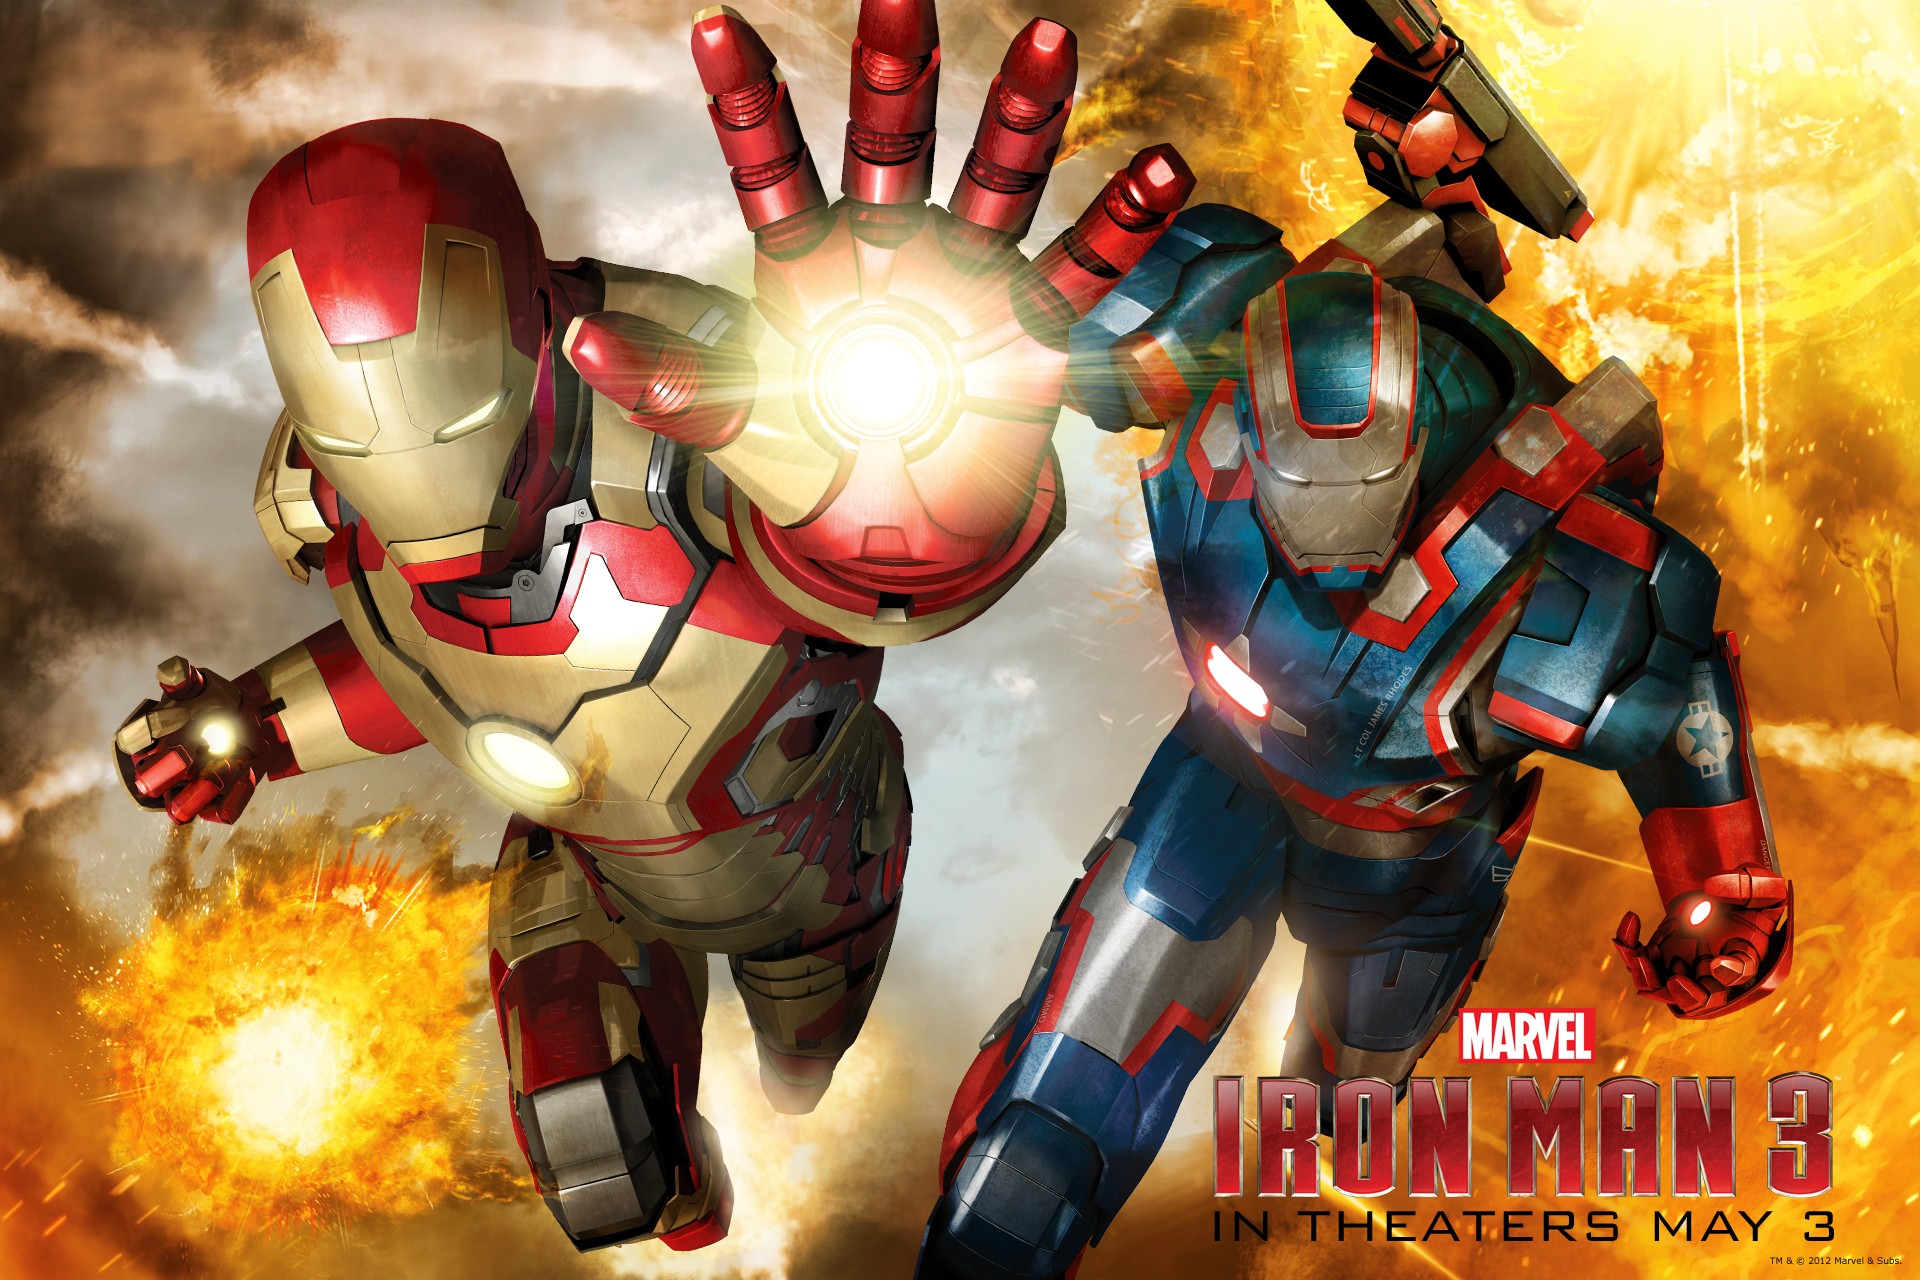 110 Iron Man 3 HD Wallpapers and Backgrounds